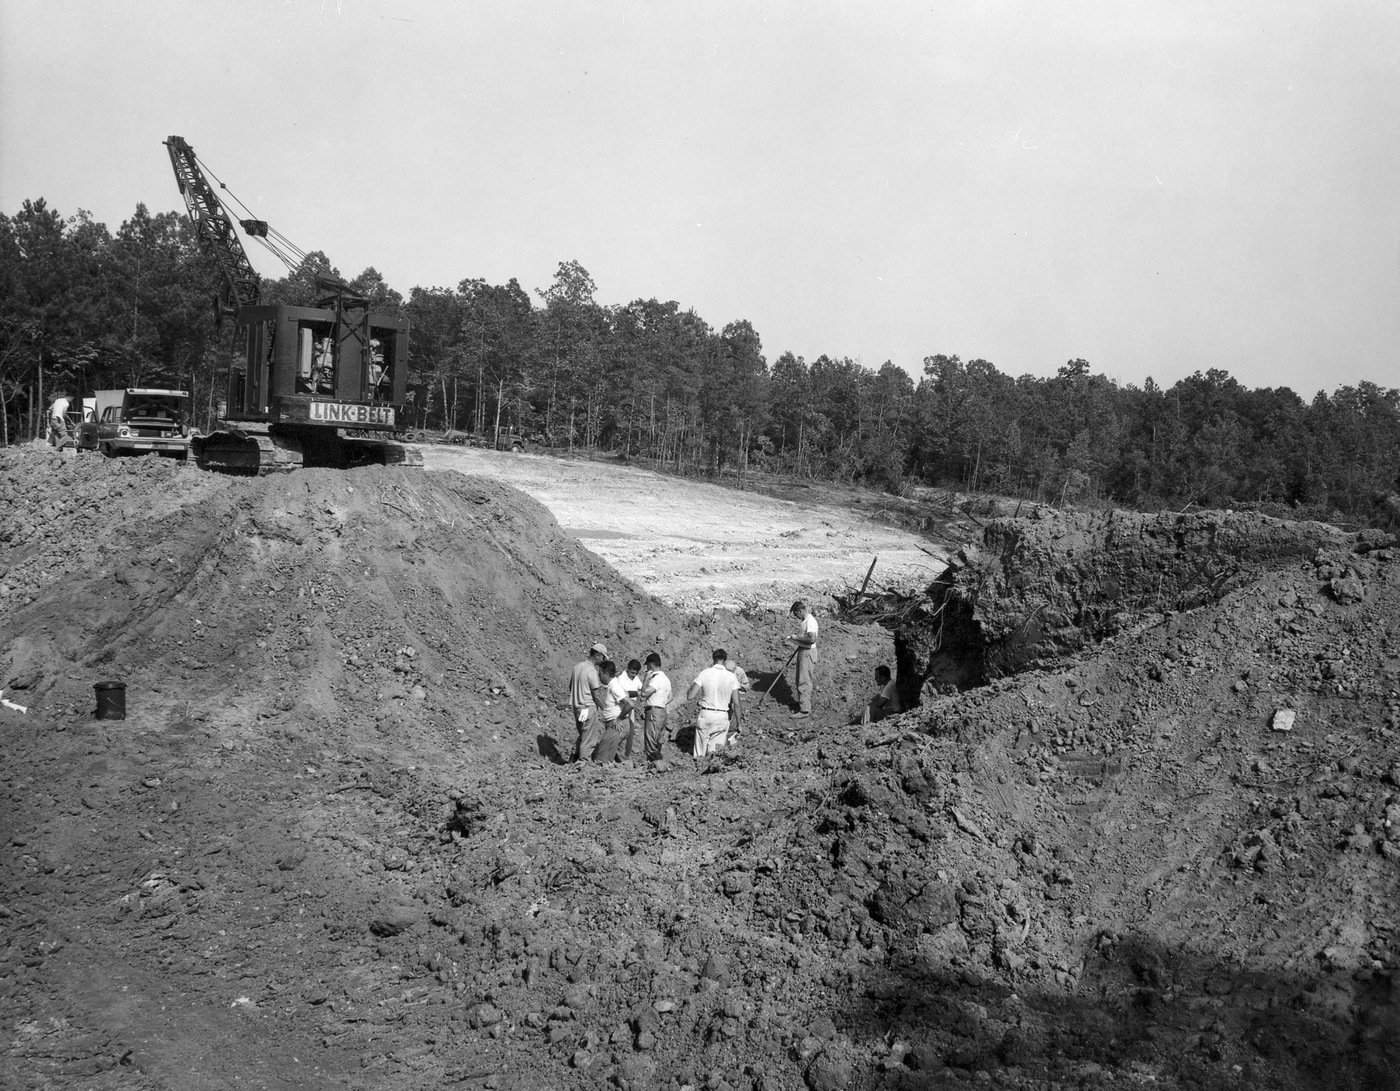 Agents digging up the remains of the three murdered civil rights workers--Andrew Goodman, James Chaney, Michael Schwerner--in the Mississippi Burning case (MIBURN) in 1964 in Meridian, Mississippi.